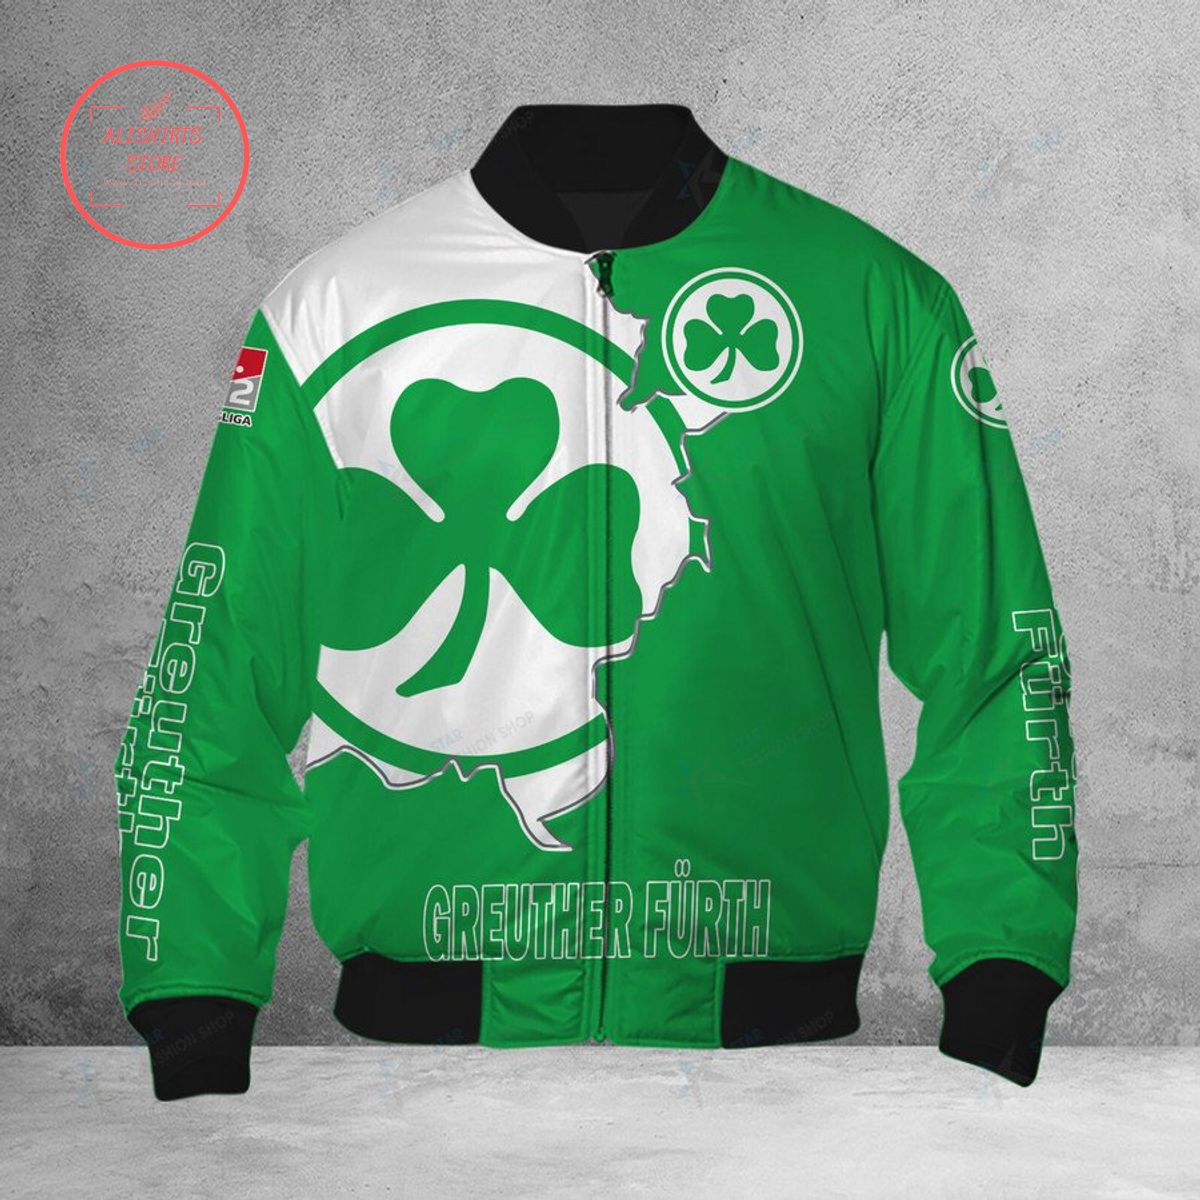 SpVgg Greuther Furth Bomber Jacket